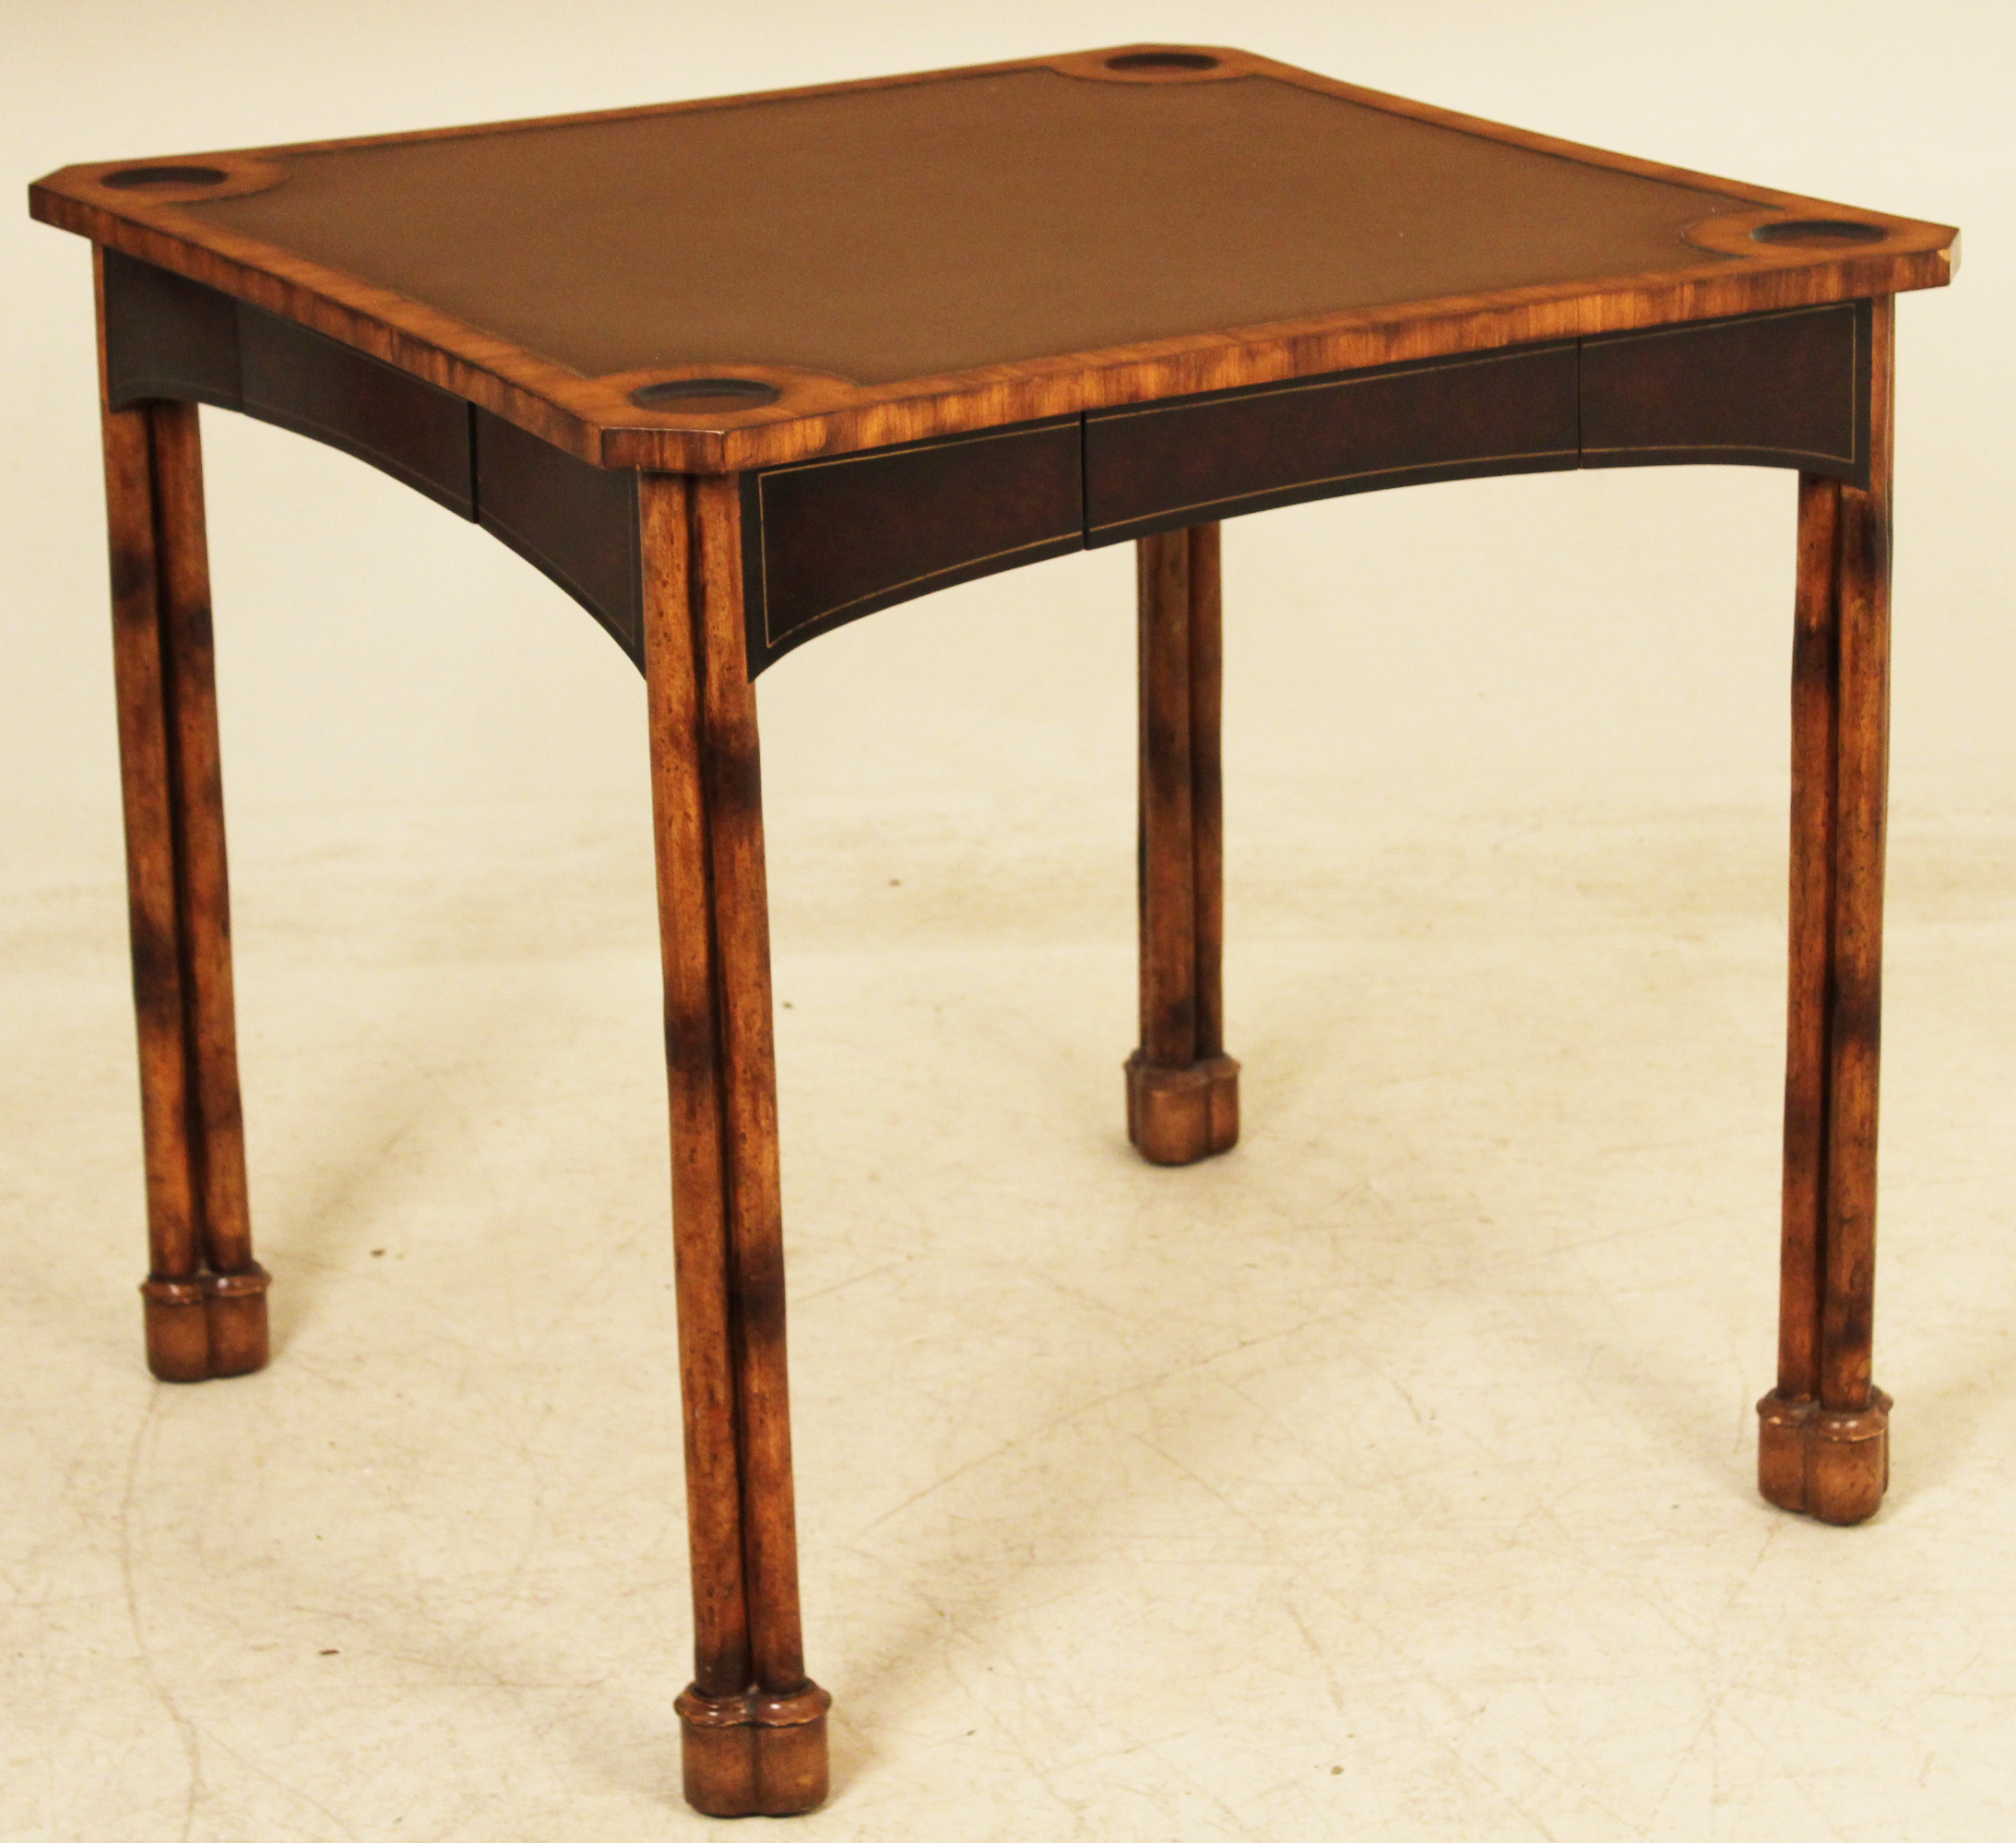 LEATHER TOP GAMES TABLE BY THEODORE 35f61b